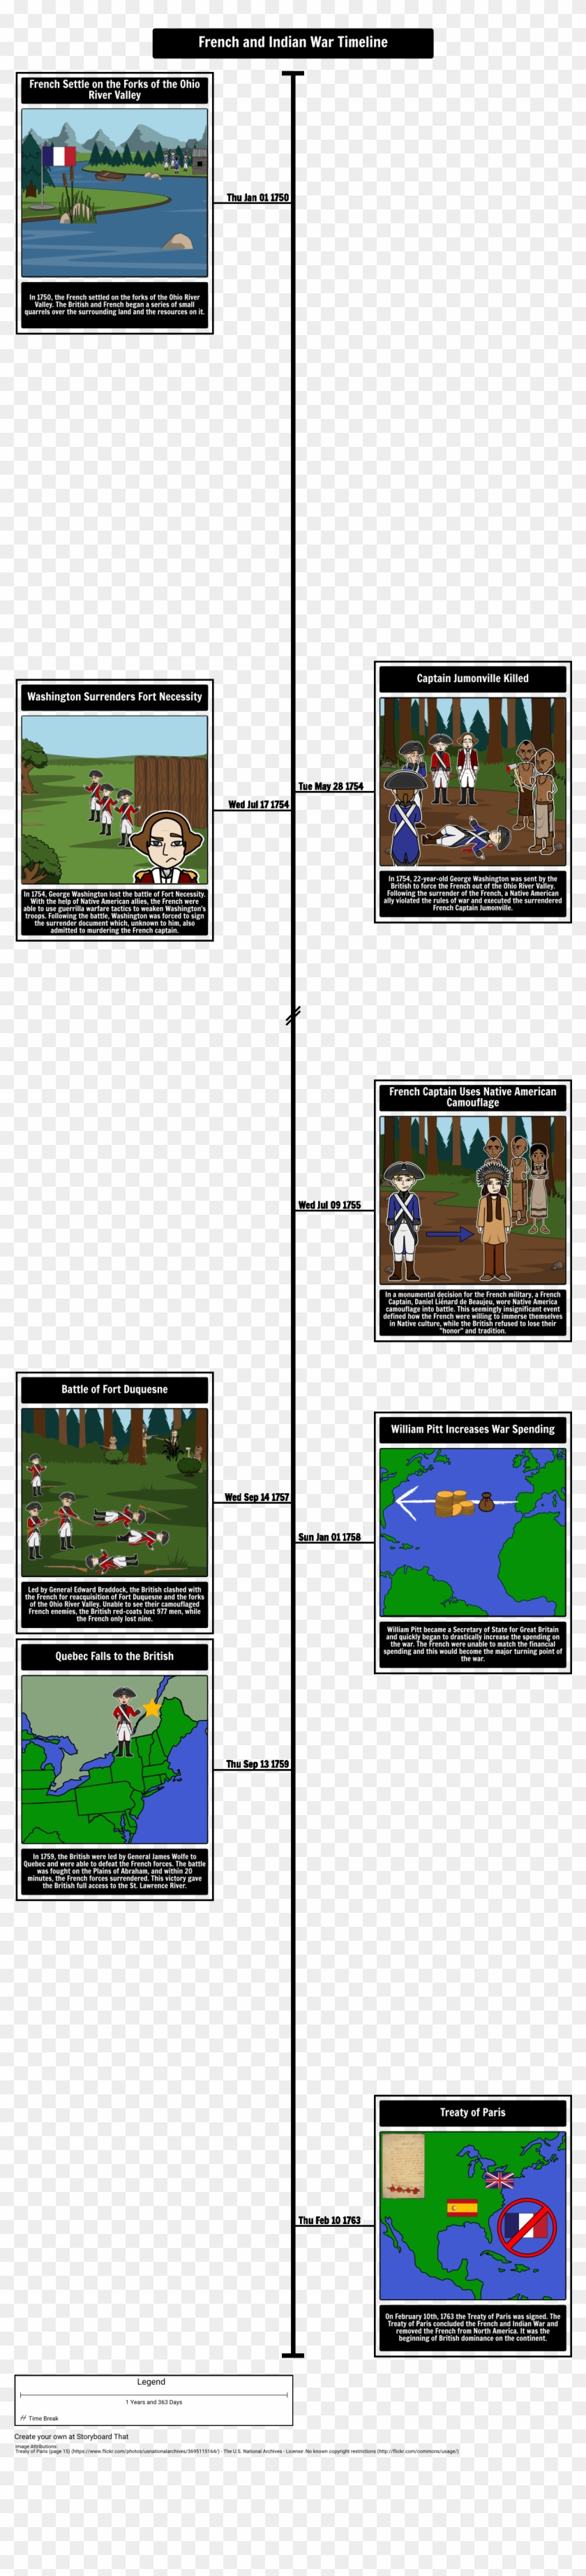 Student Room Essay Manchester University - French And Indian War Battle Timeline Clipart #4948905